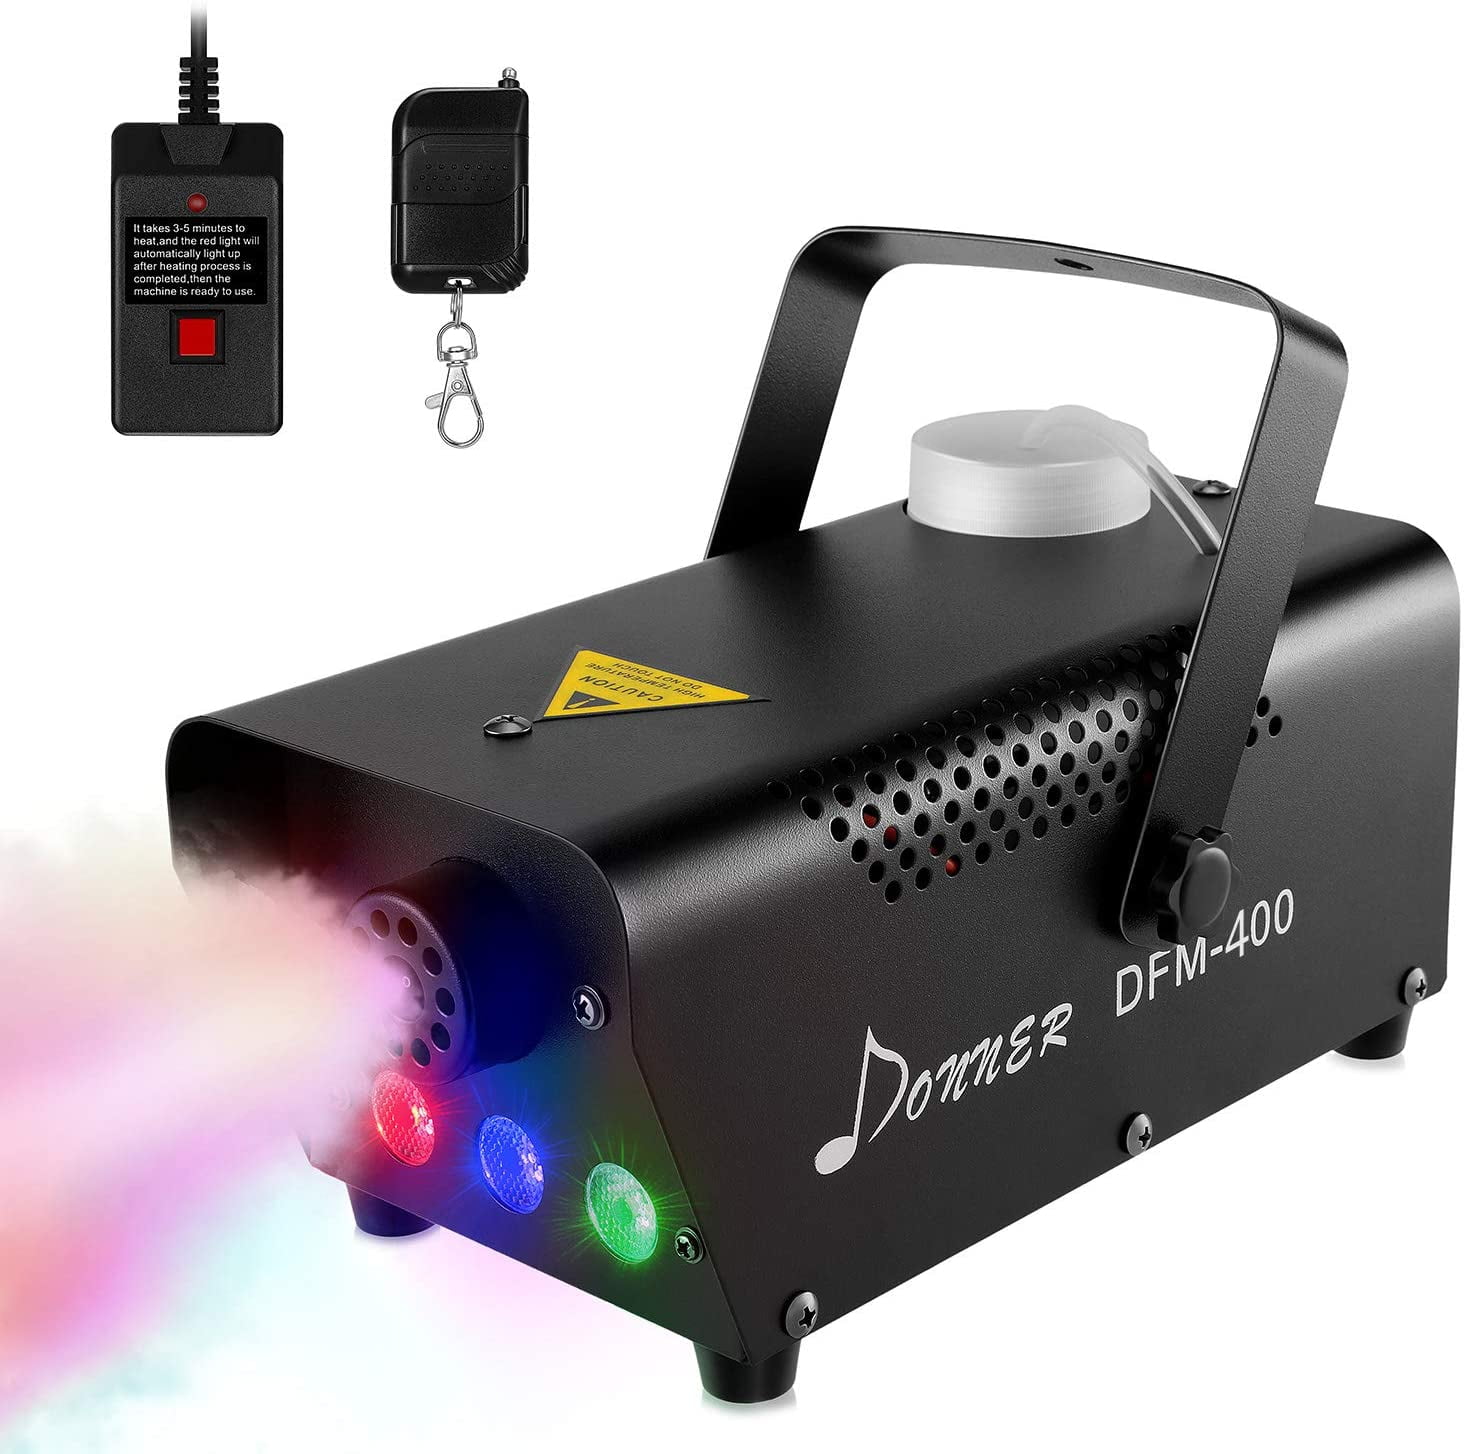 JDR Fog Machine with Controllable lights with Wireless and Wired Remote Control for Holidays Parties Weddings Christmas Halloween Red,Green,Blue DJ LED Smoke Machine with Fuse Protection 